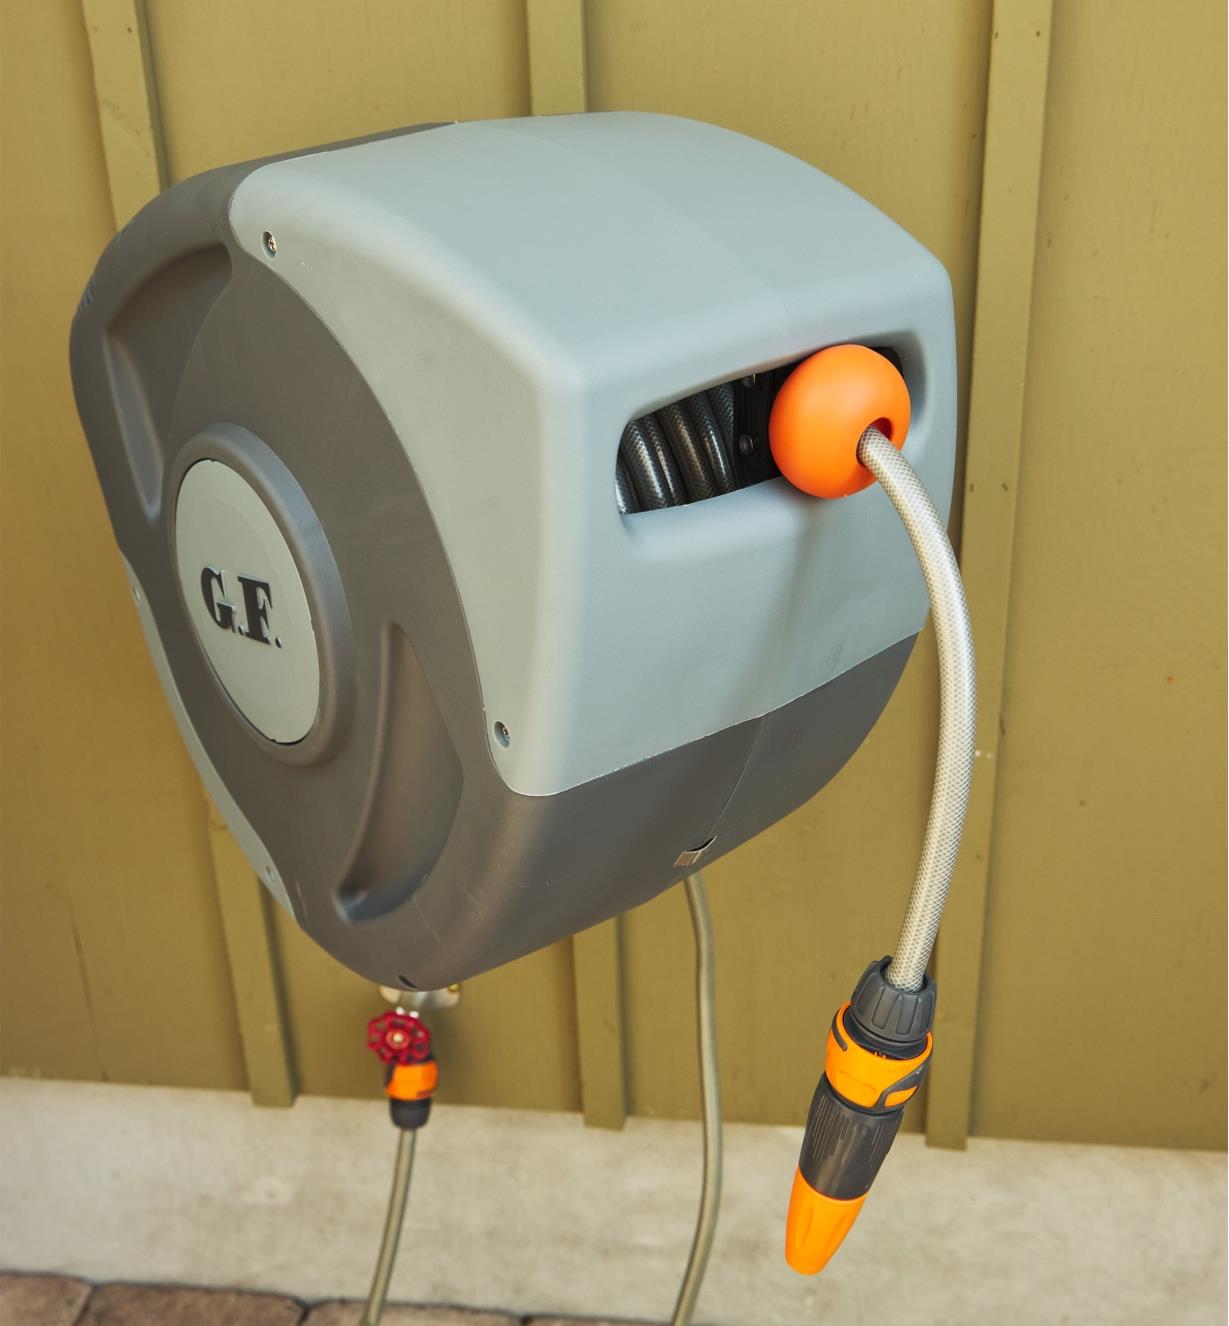 The auto-retracting hose reel is mounted to a wall.